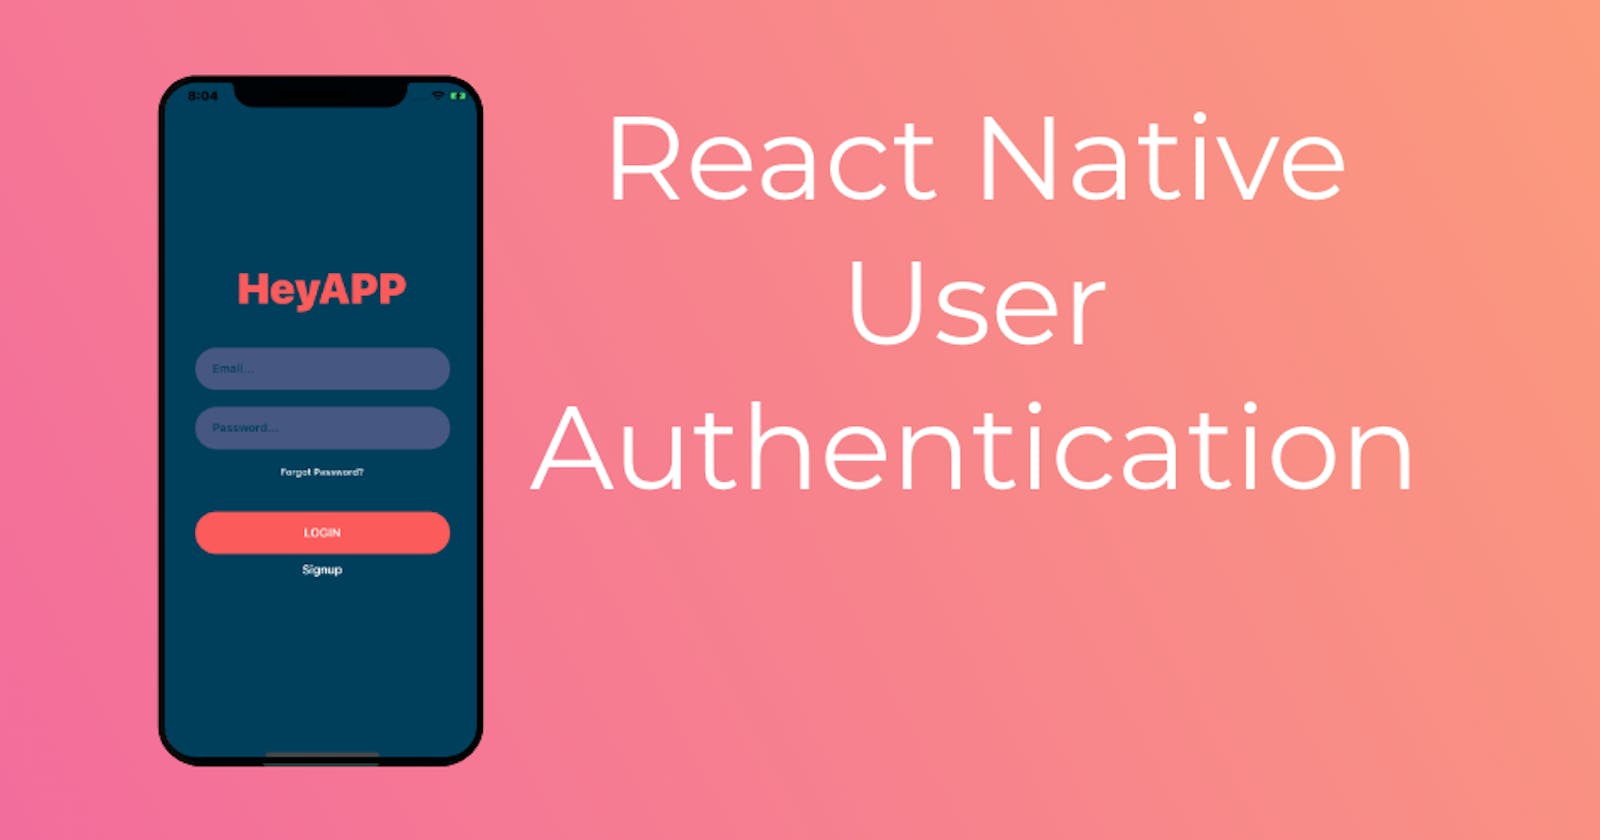 How can authentication tokens be stored on a device in a React Native app, and what are some examples of storage options?